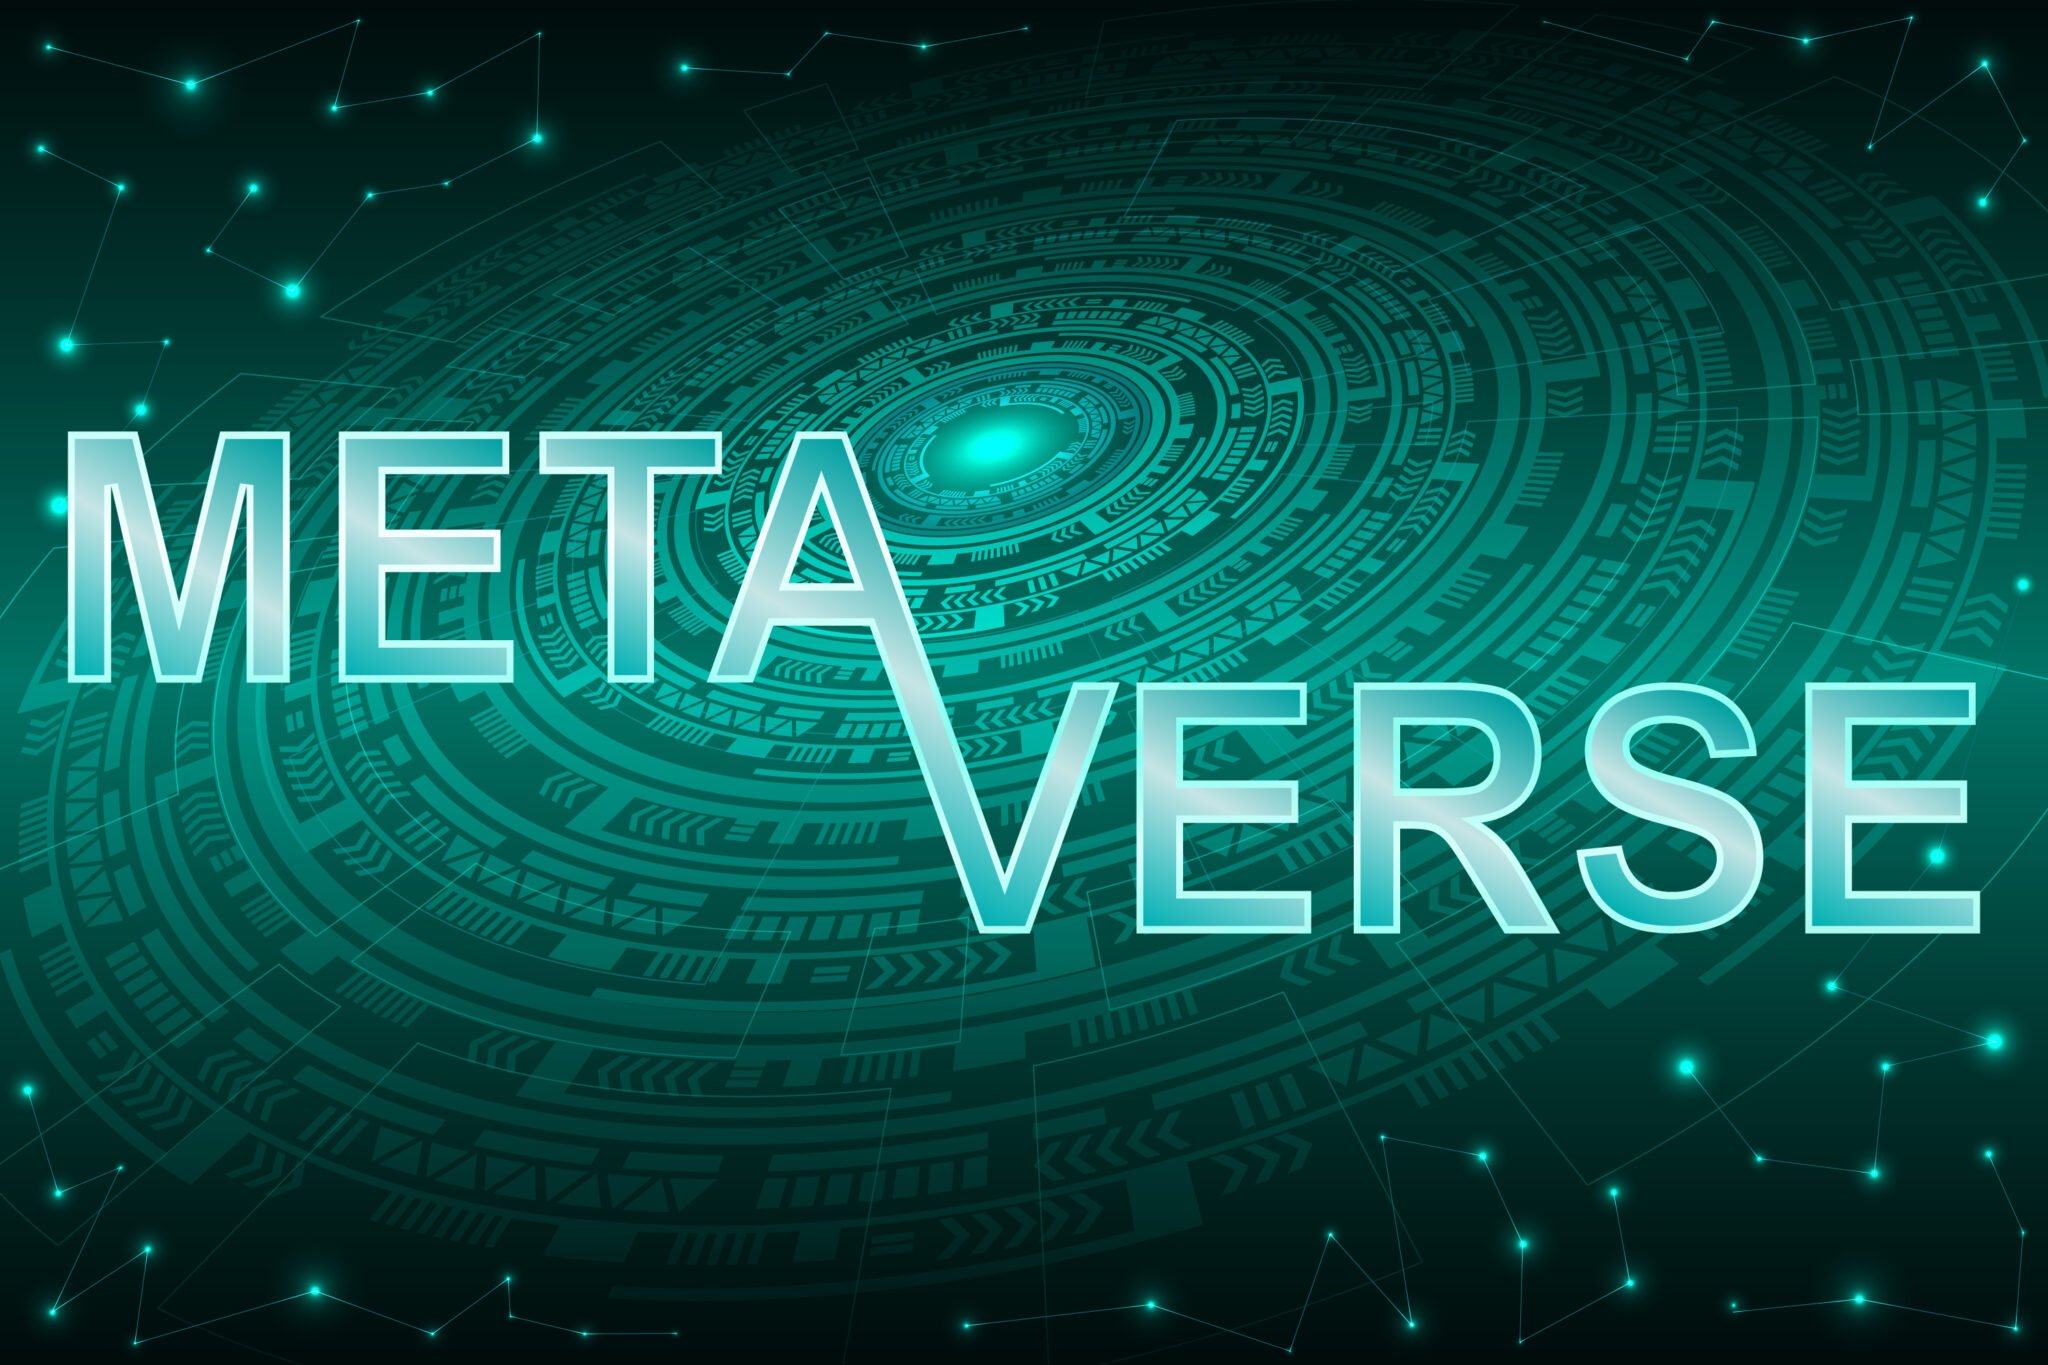 Métaverse text design on abstract, futuristic, green background. Metaverse, virtual reality, augmented reality and blockchain technology, user interface 3D experience.